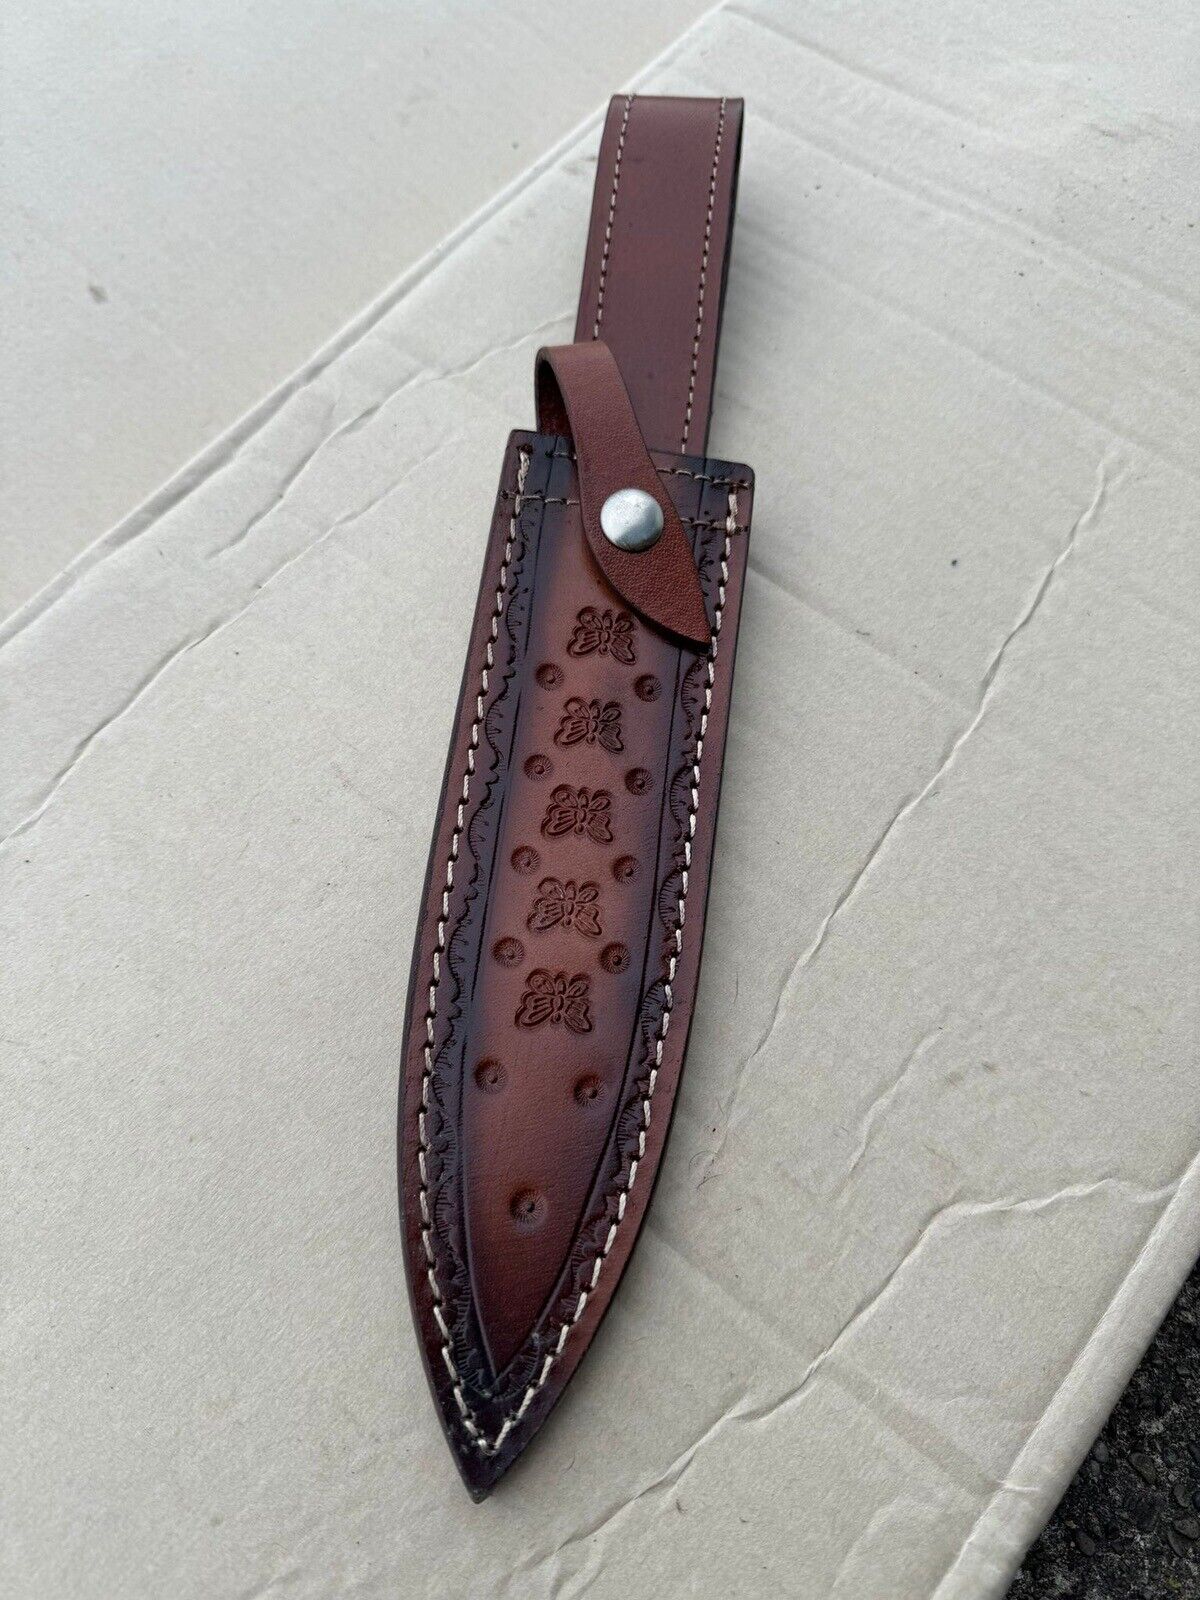 Handmade Premium Leather Sheath, 14 inch overall. Holds 9 inch blades.